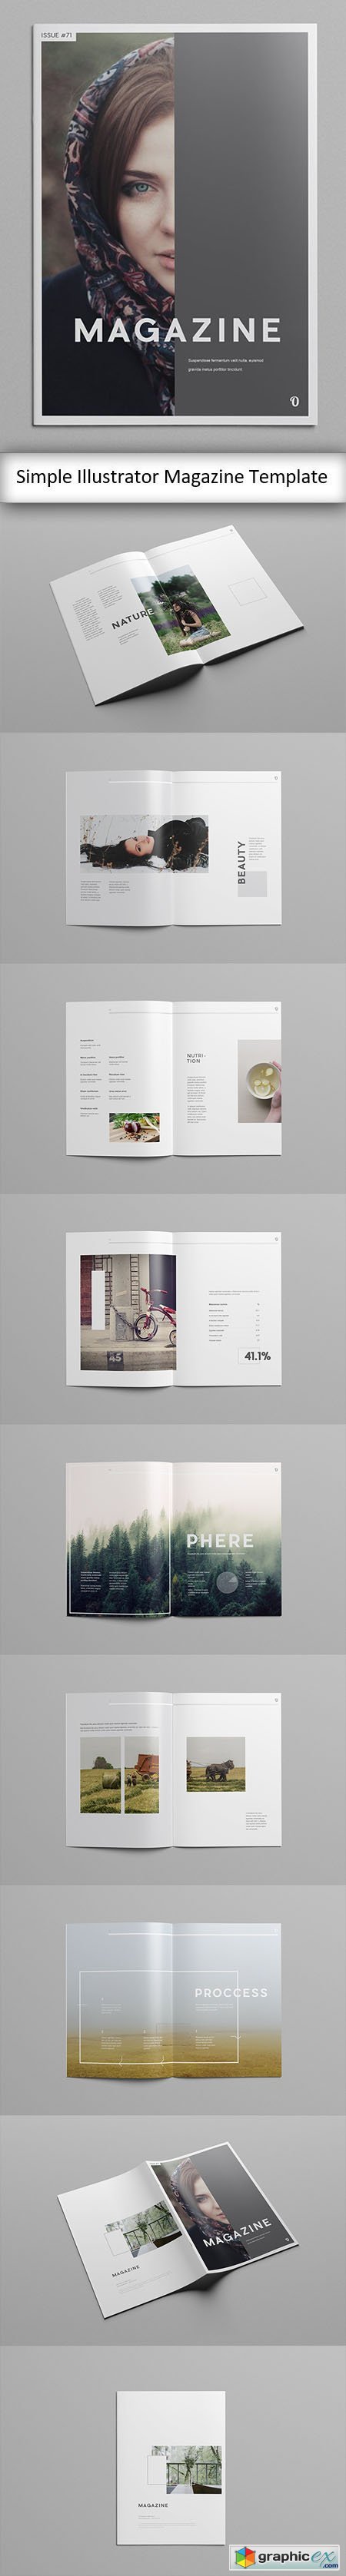 Simple Illustrator Magazine Template (Images Included)